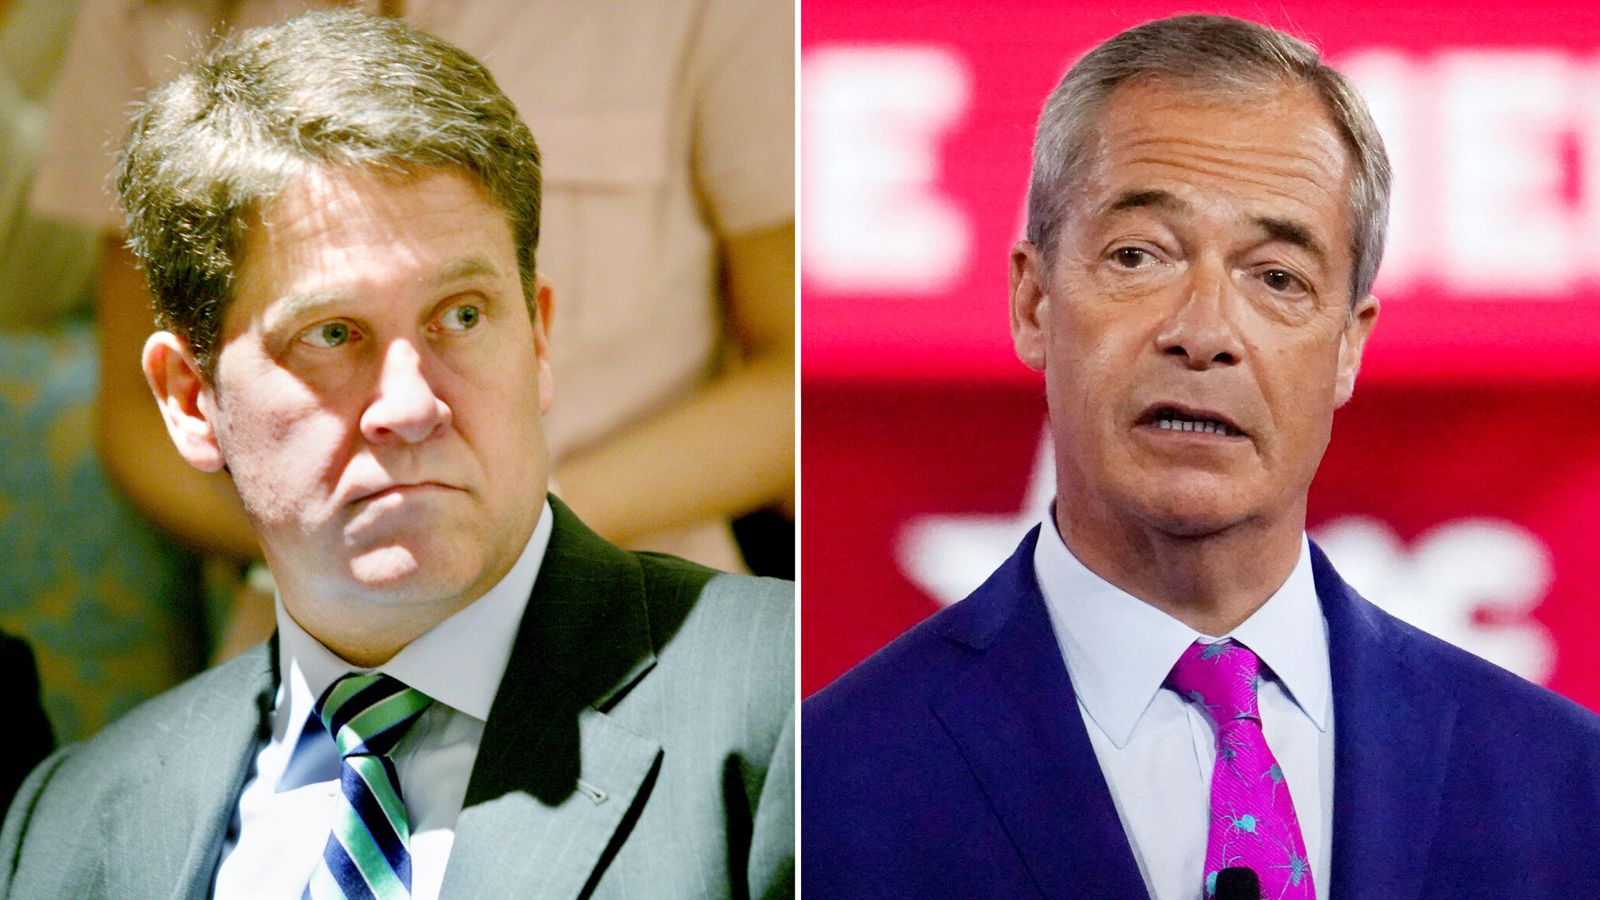 Coutts chief executive stands down after Farage banking row